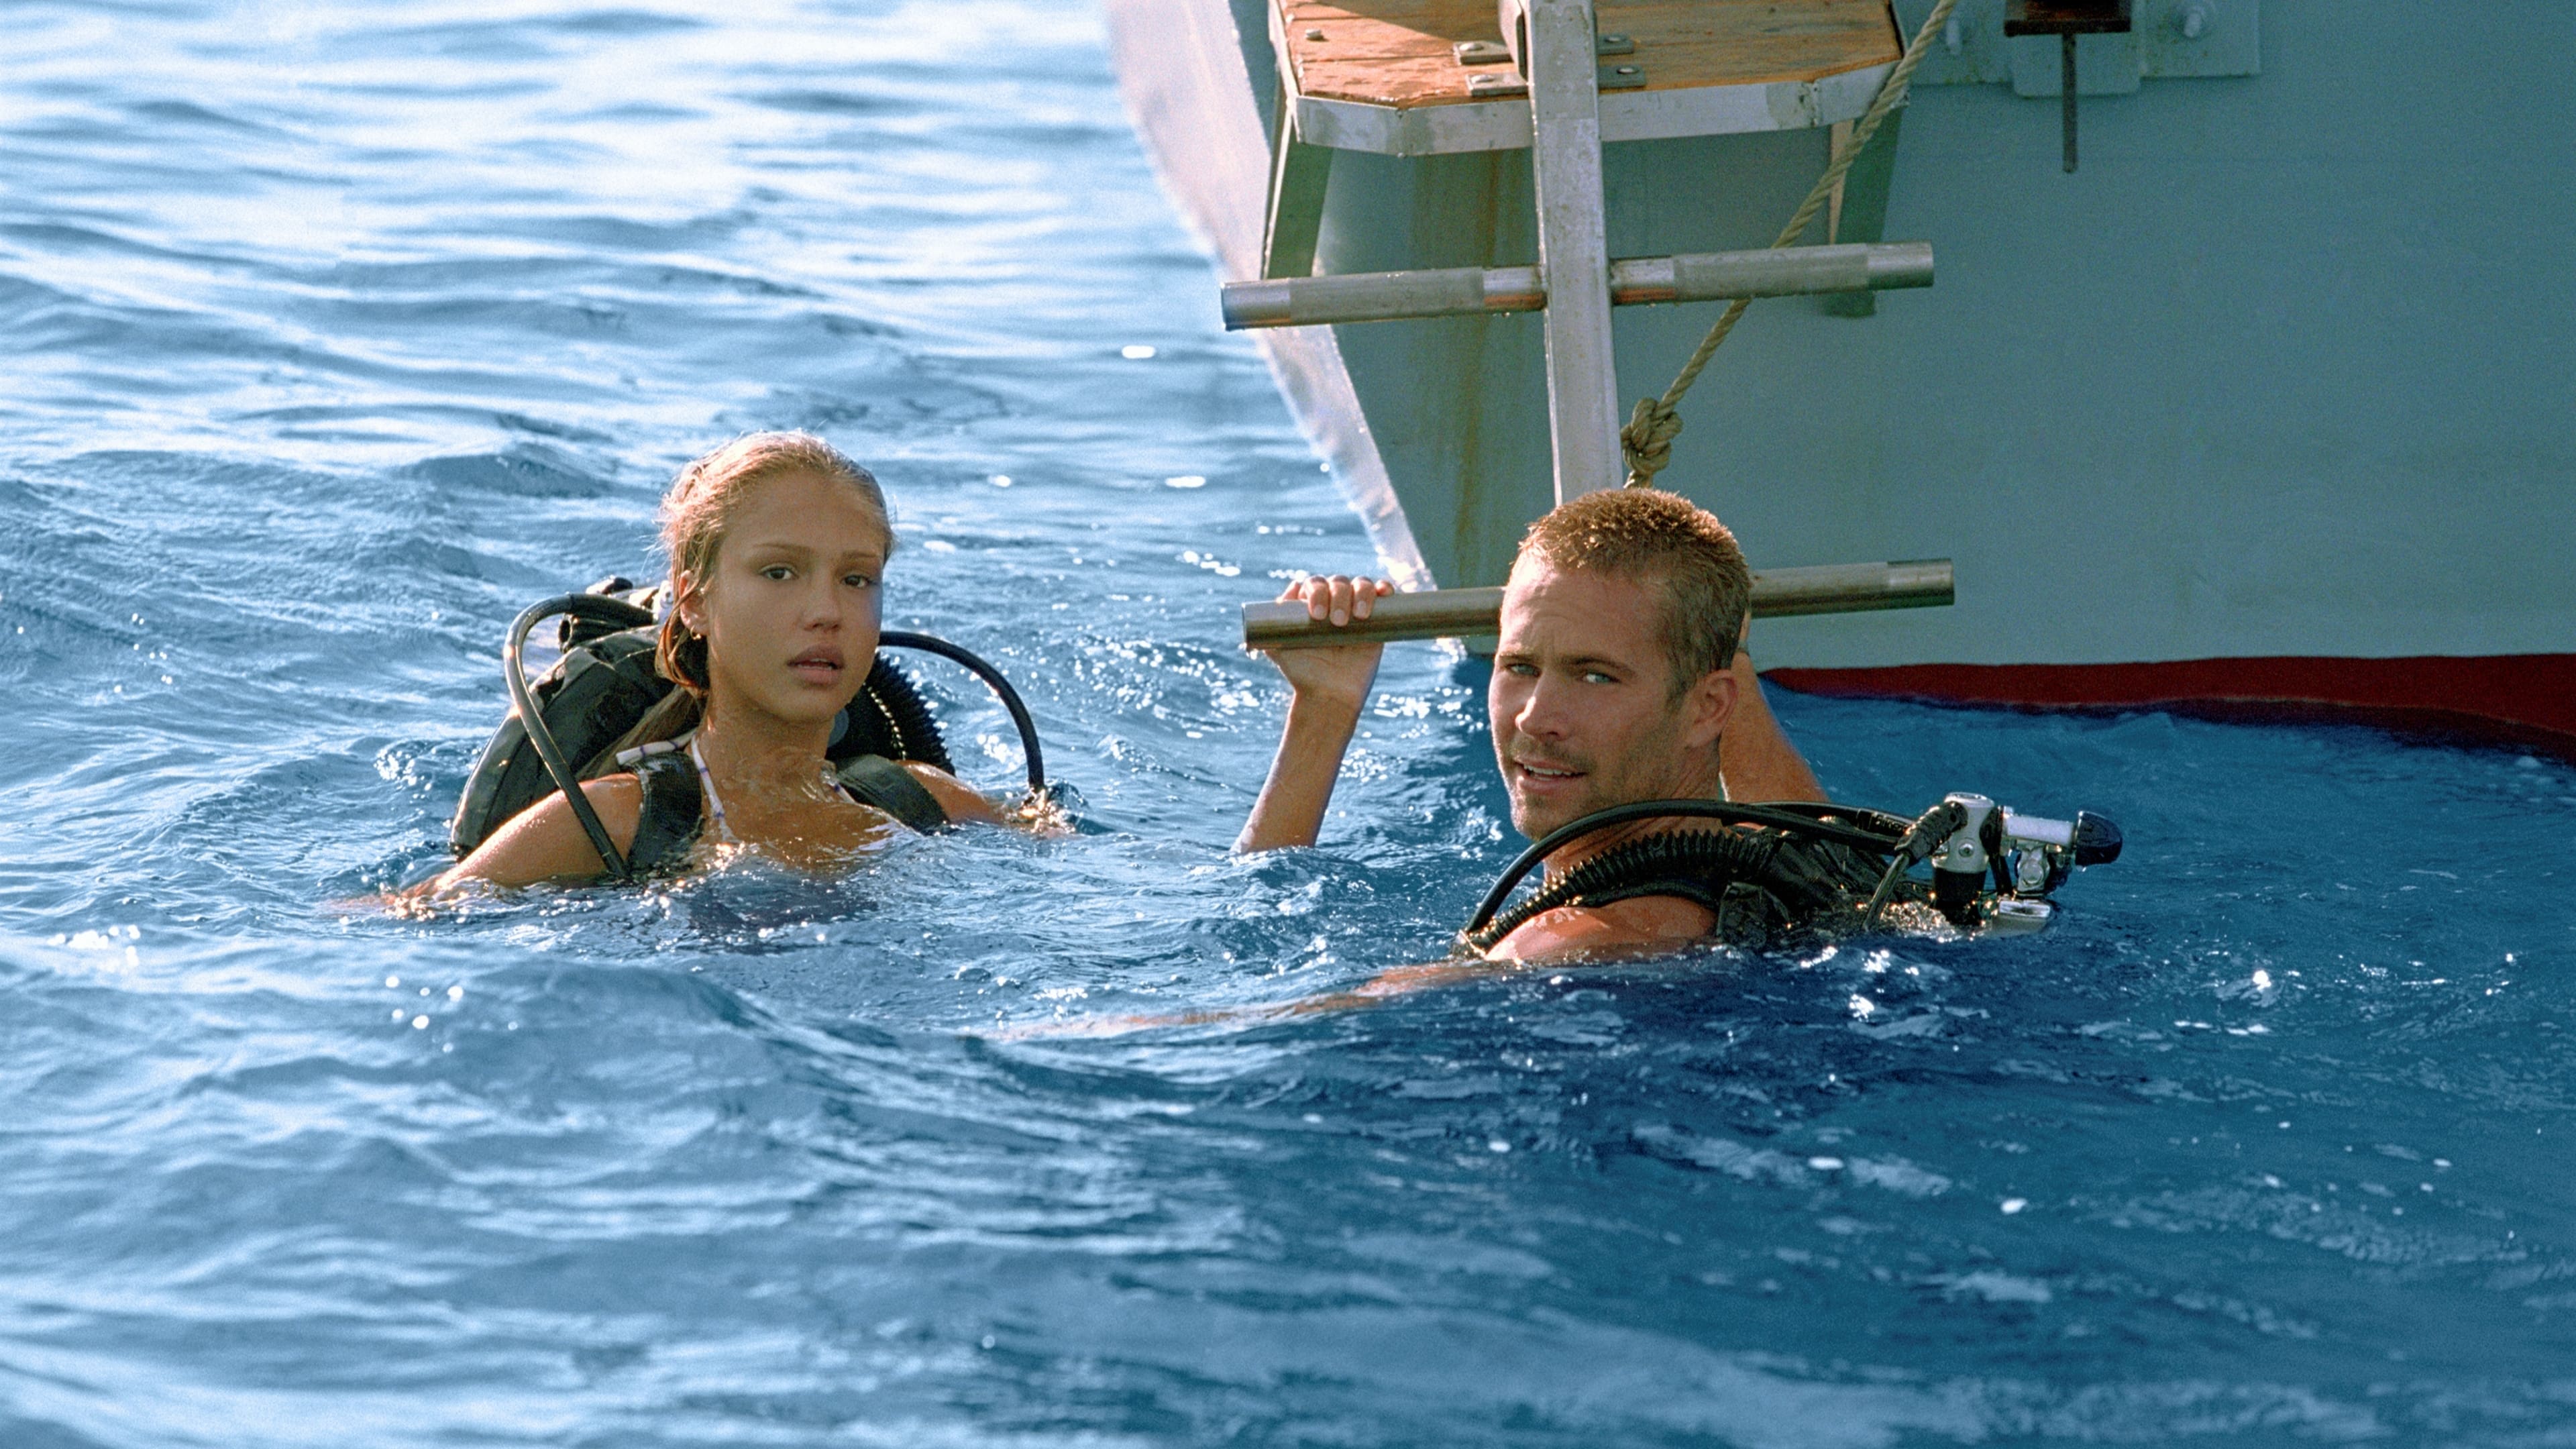 Into the Blue (2005)